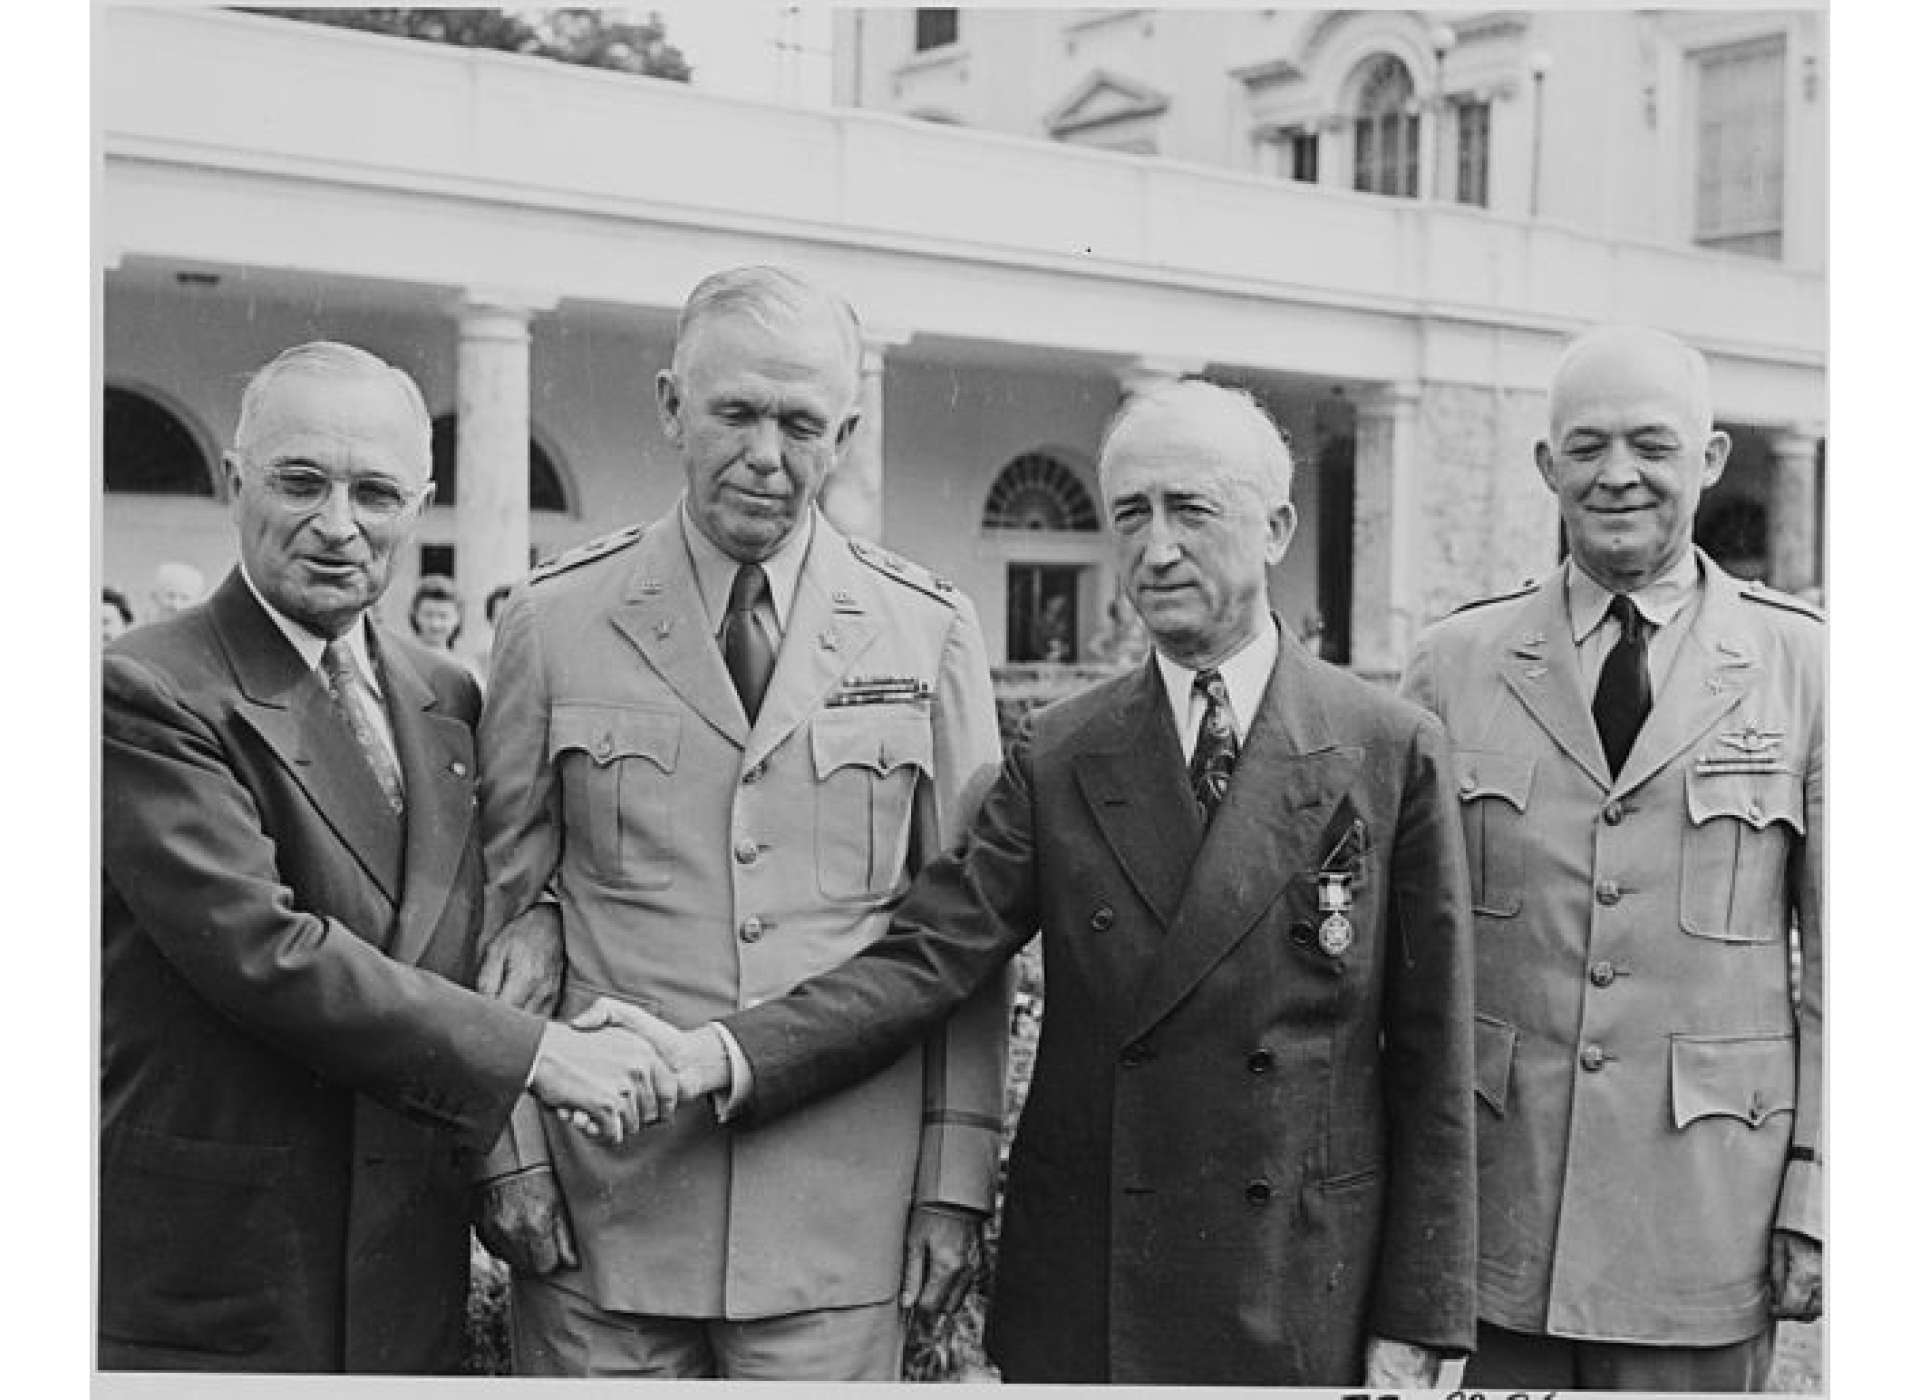 “Photograph of President Truman shaking hands with Secretary of State James F. Byrnes after awarding him the Distinguished Service Medal,” August 13, 1945, National Archives and Records Administration, Office of Presidential Libraries, Harry S. Truman Library, (NAID) 199180.